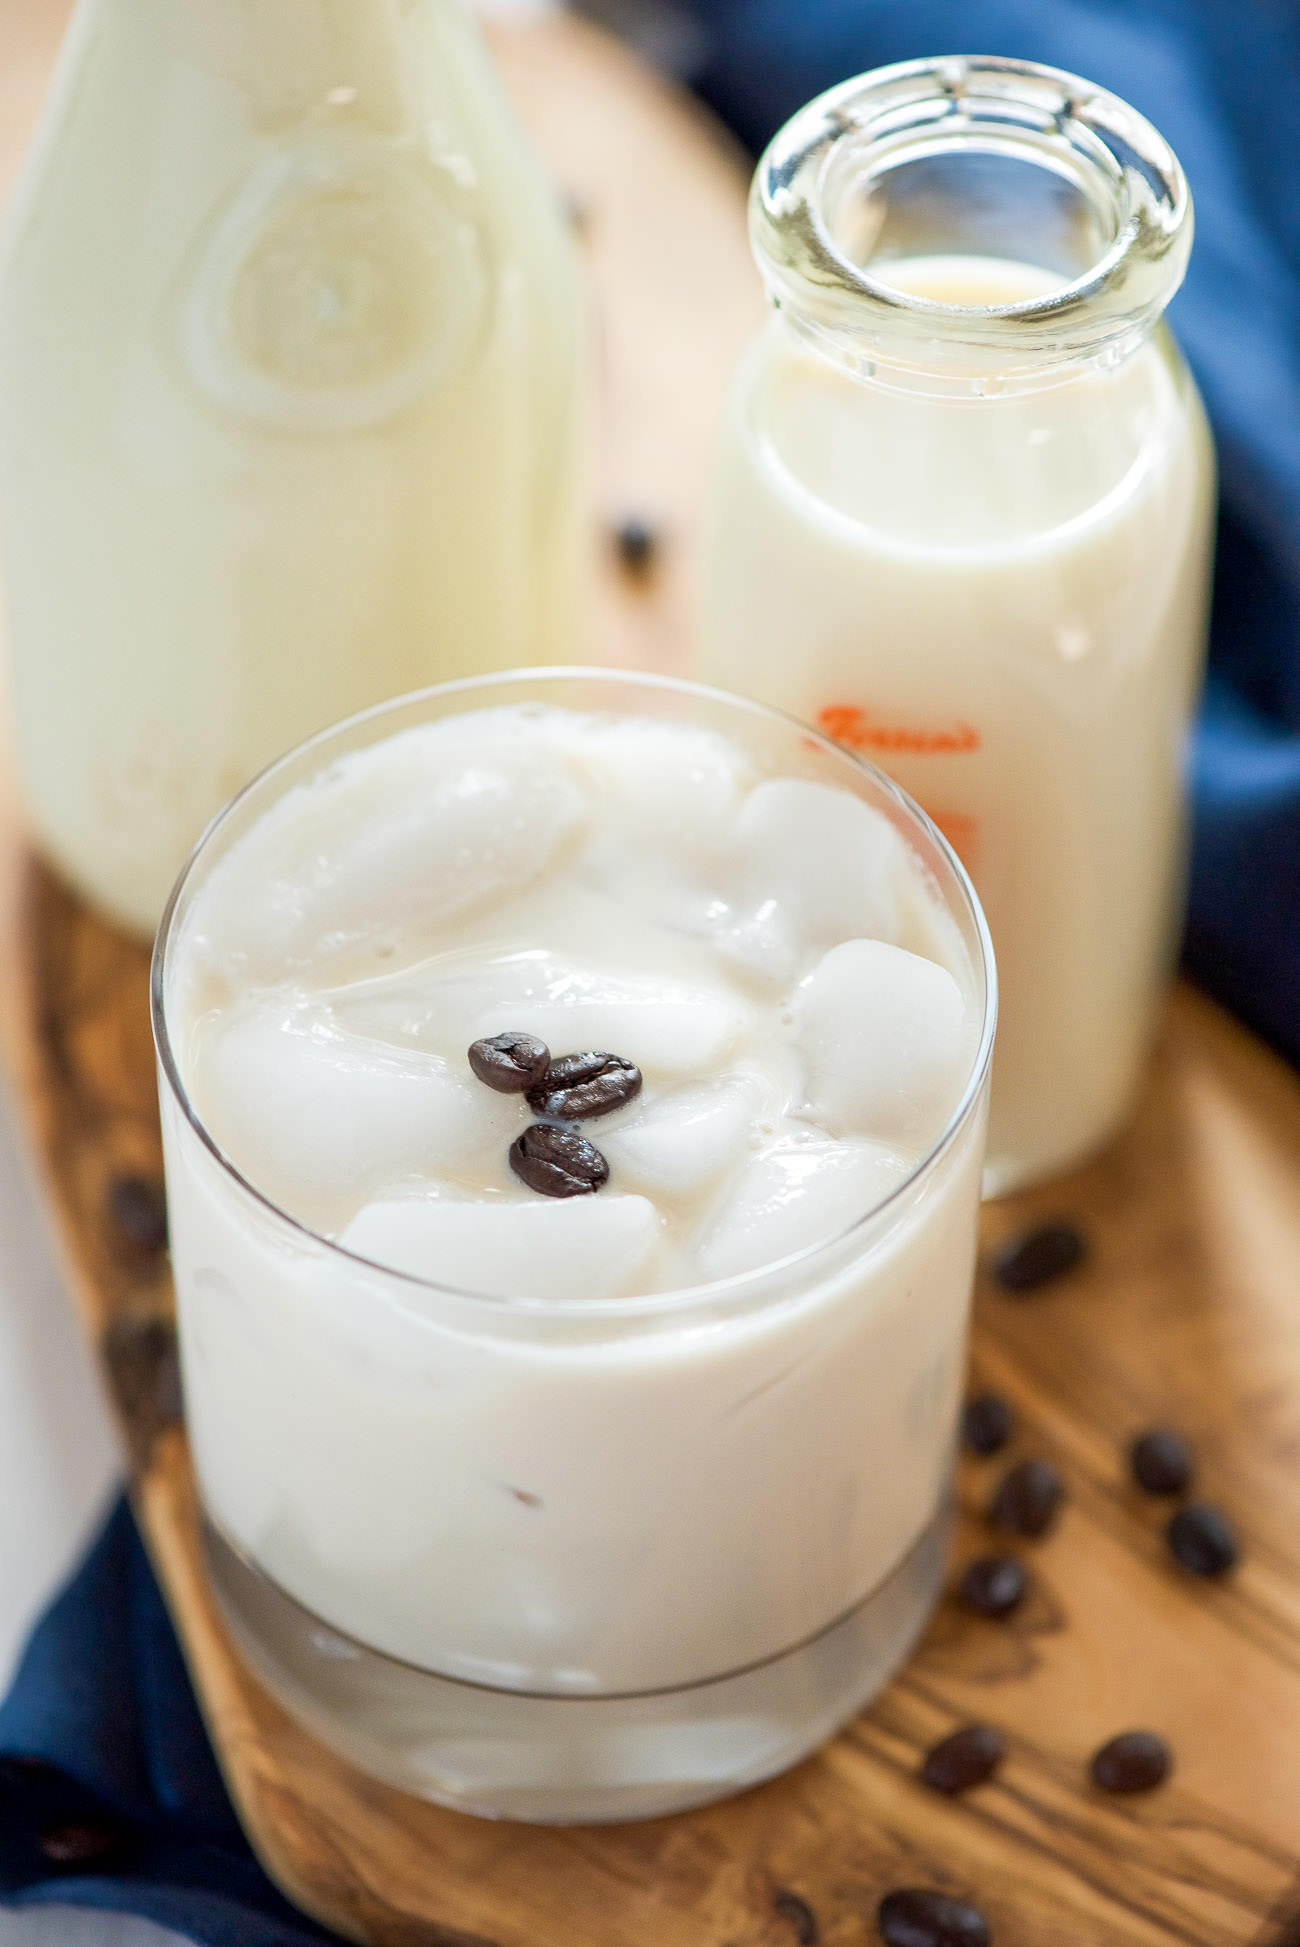 This is simply the best Homemade Baileys Irish Cream! It is perfectly sweet, smooth and a slight whiskey kick. Whip up a batch and add a splash to your morning coffee or over ice to end a long day!